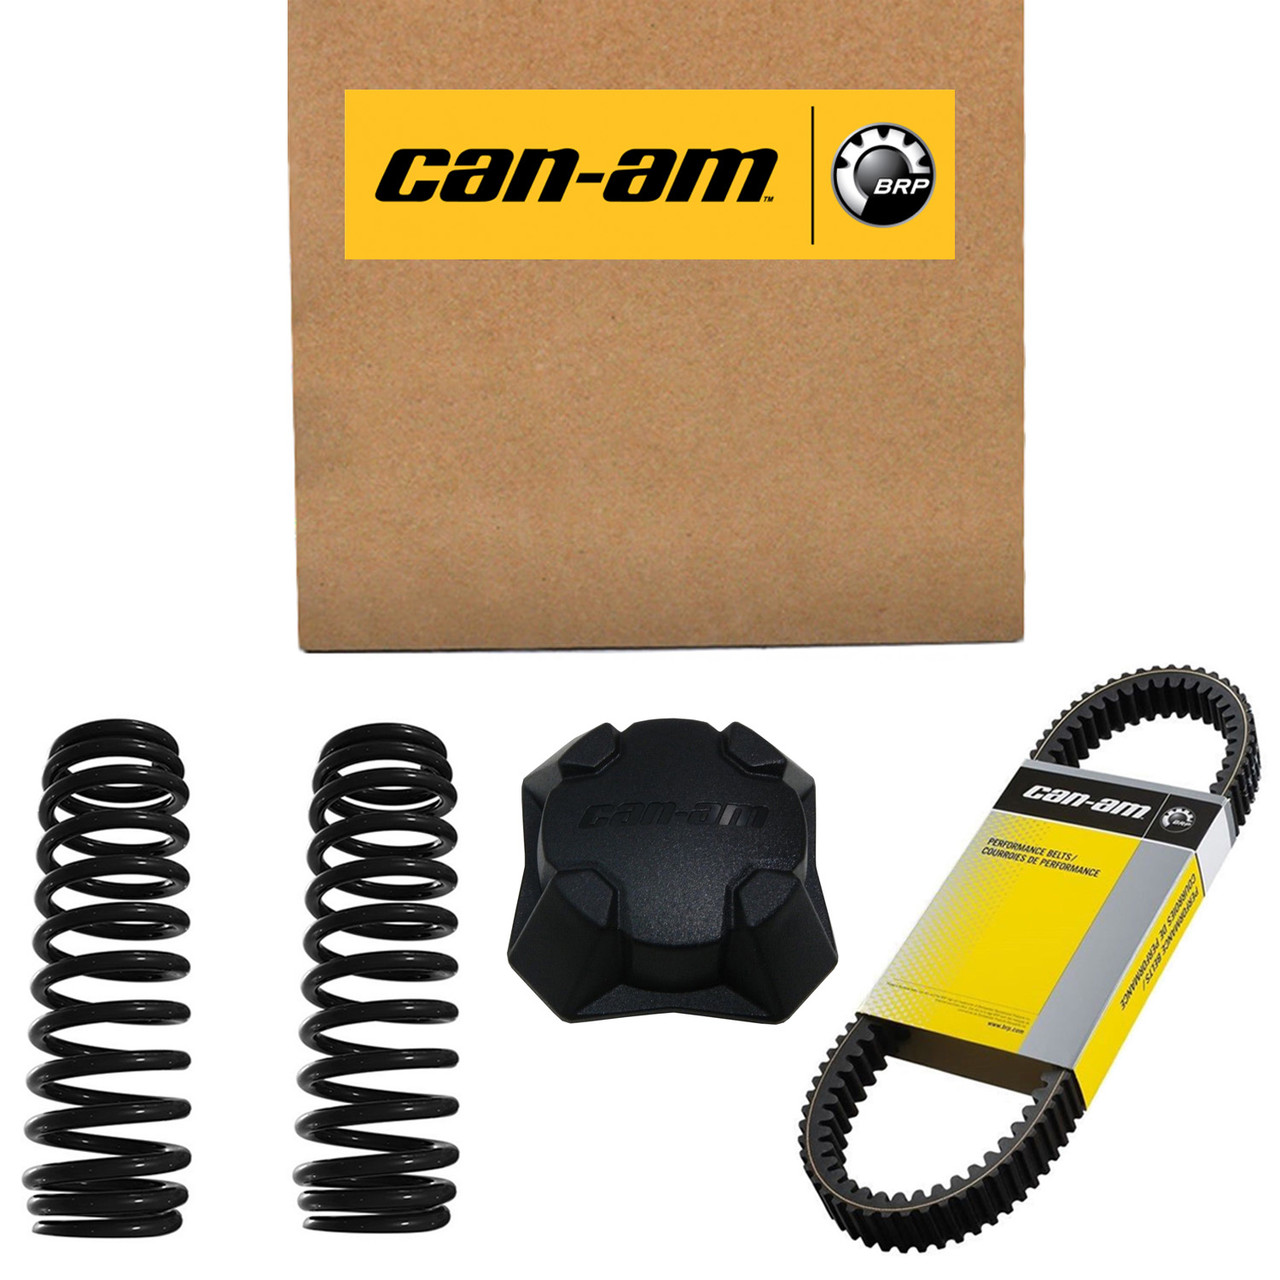 Can-Am New OEM Cargo Harness, 710006508